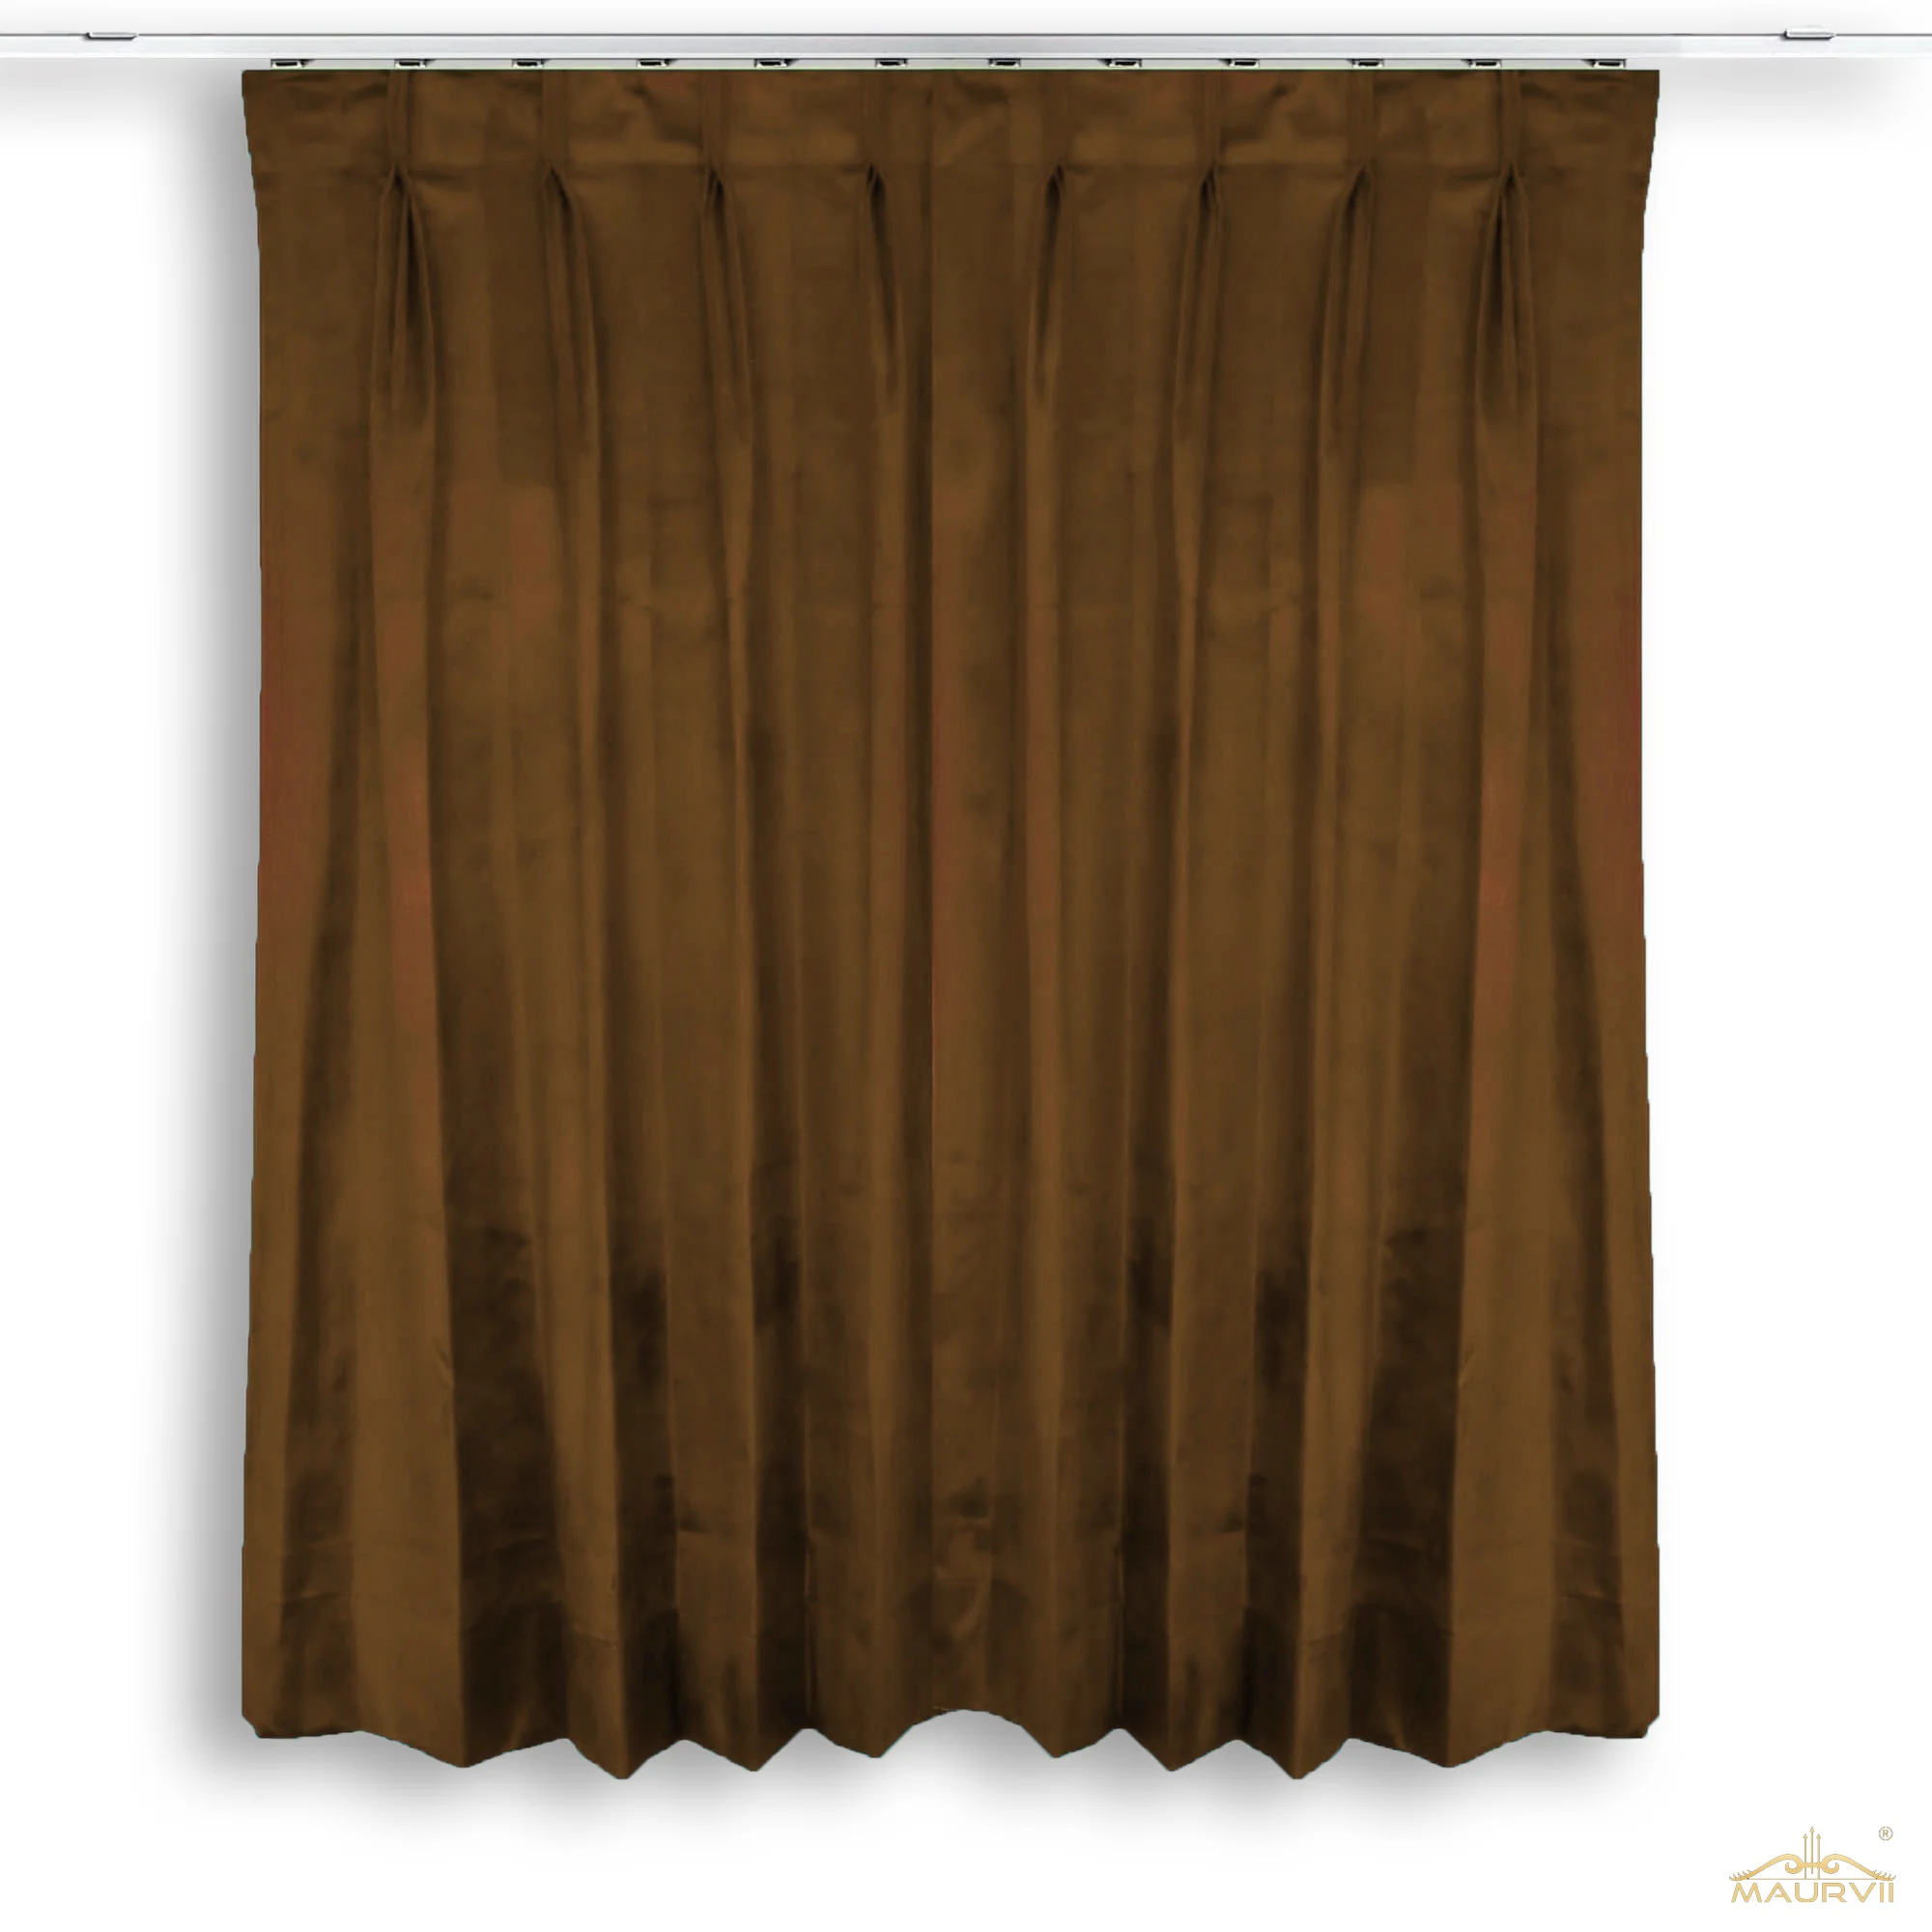 Double pleated velvet stage curtains in camel brown color